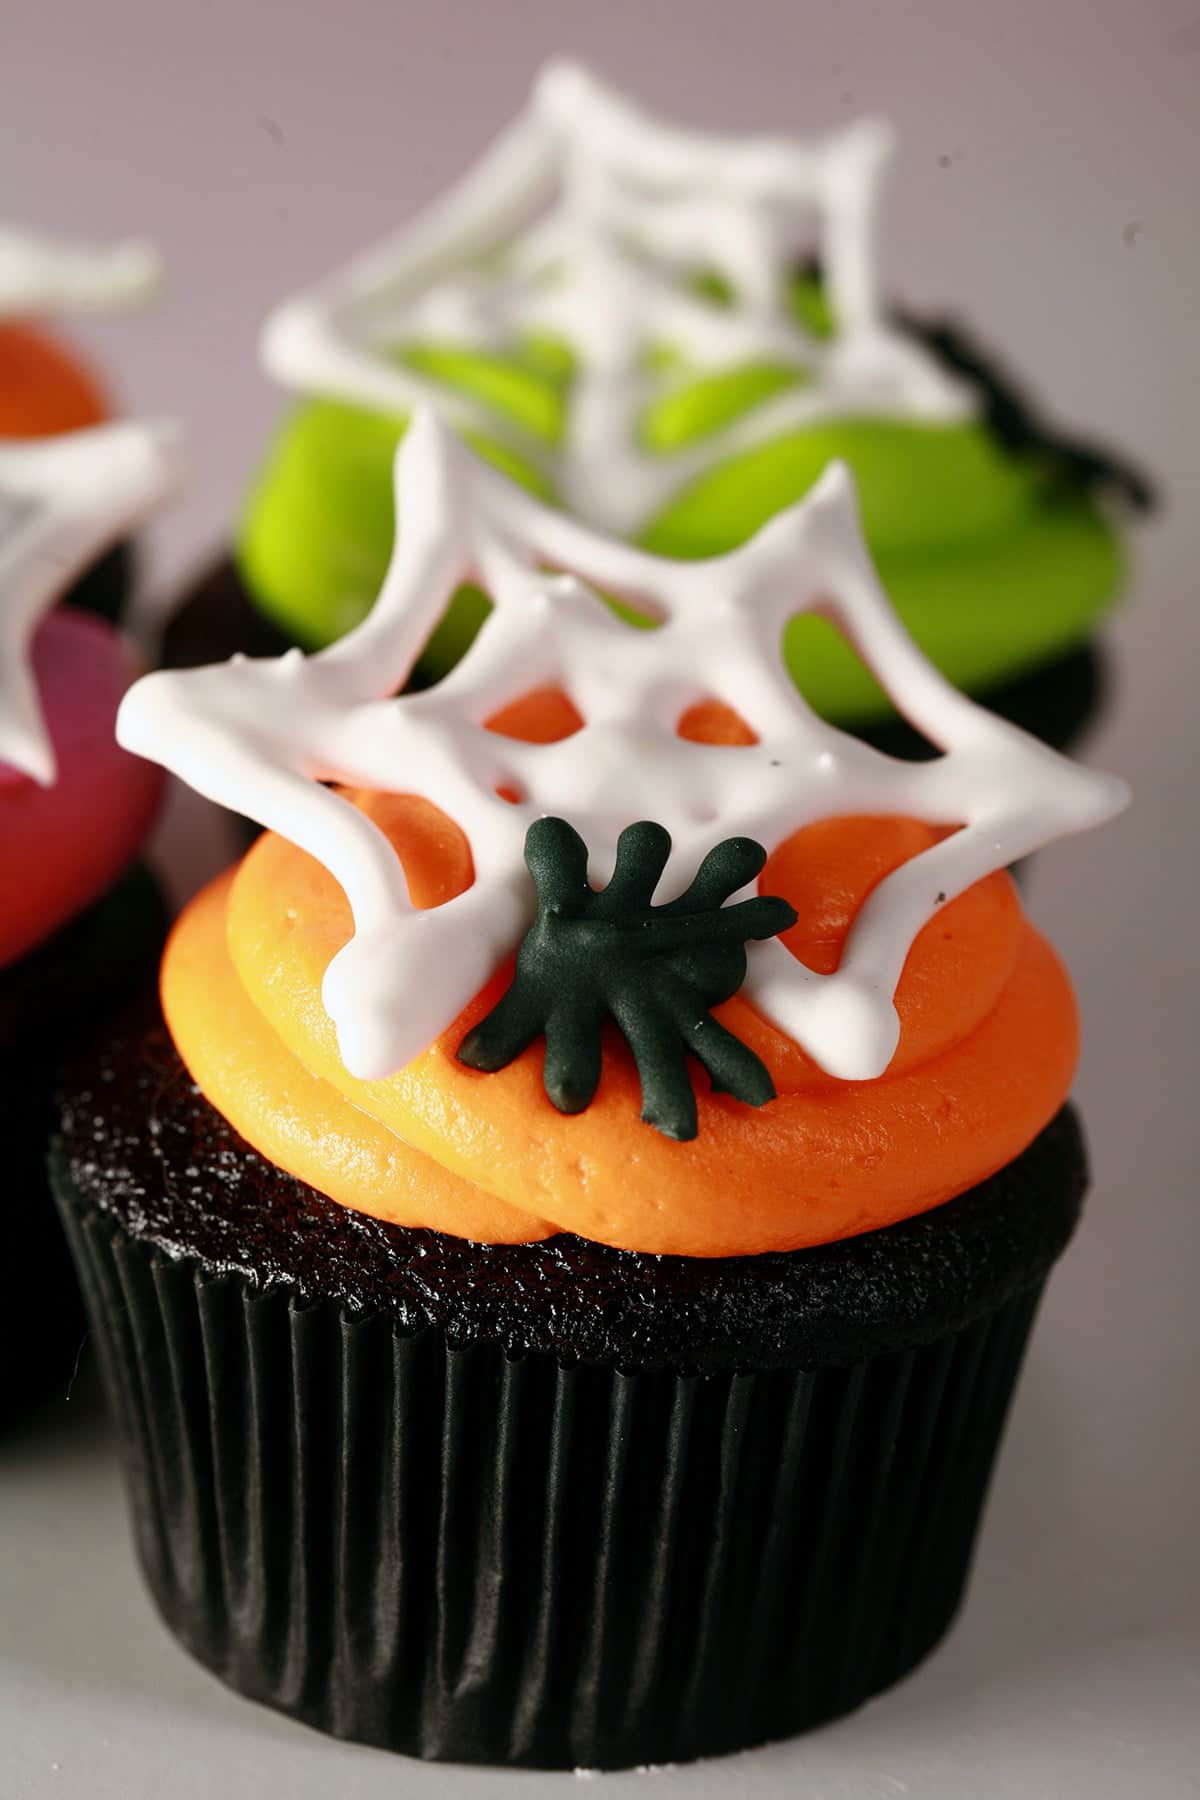 4 black velvet Halloween cupcakes frosted with brightly coloured icing - lime green, electric purple, and orange - are shown topped with royal icing spider webs and spiders.